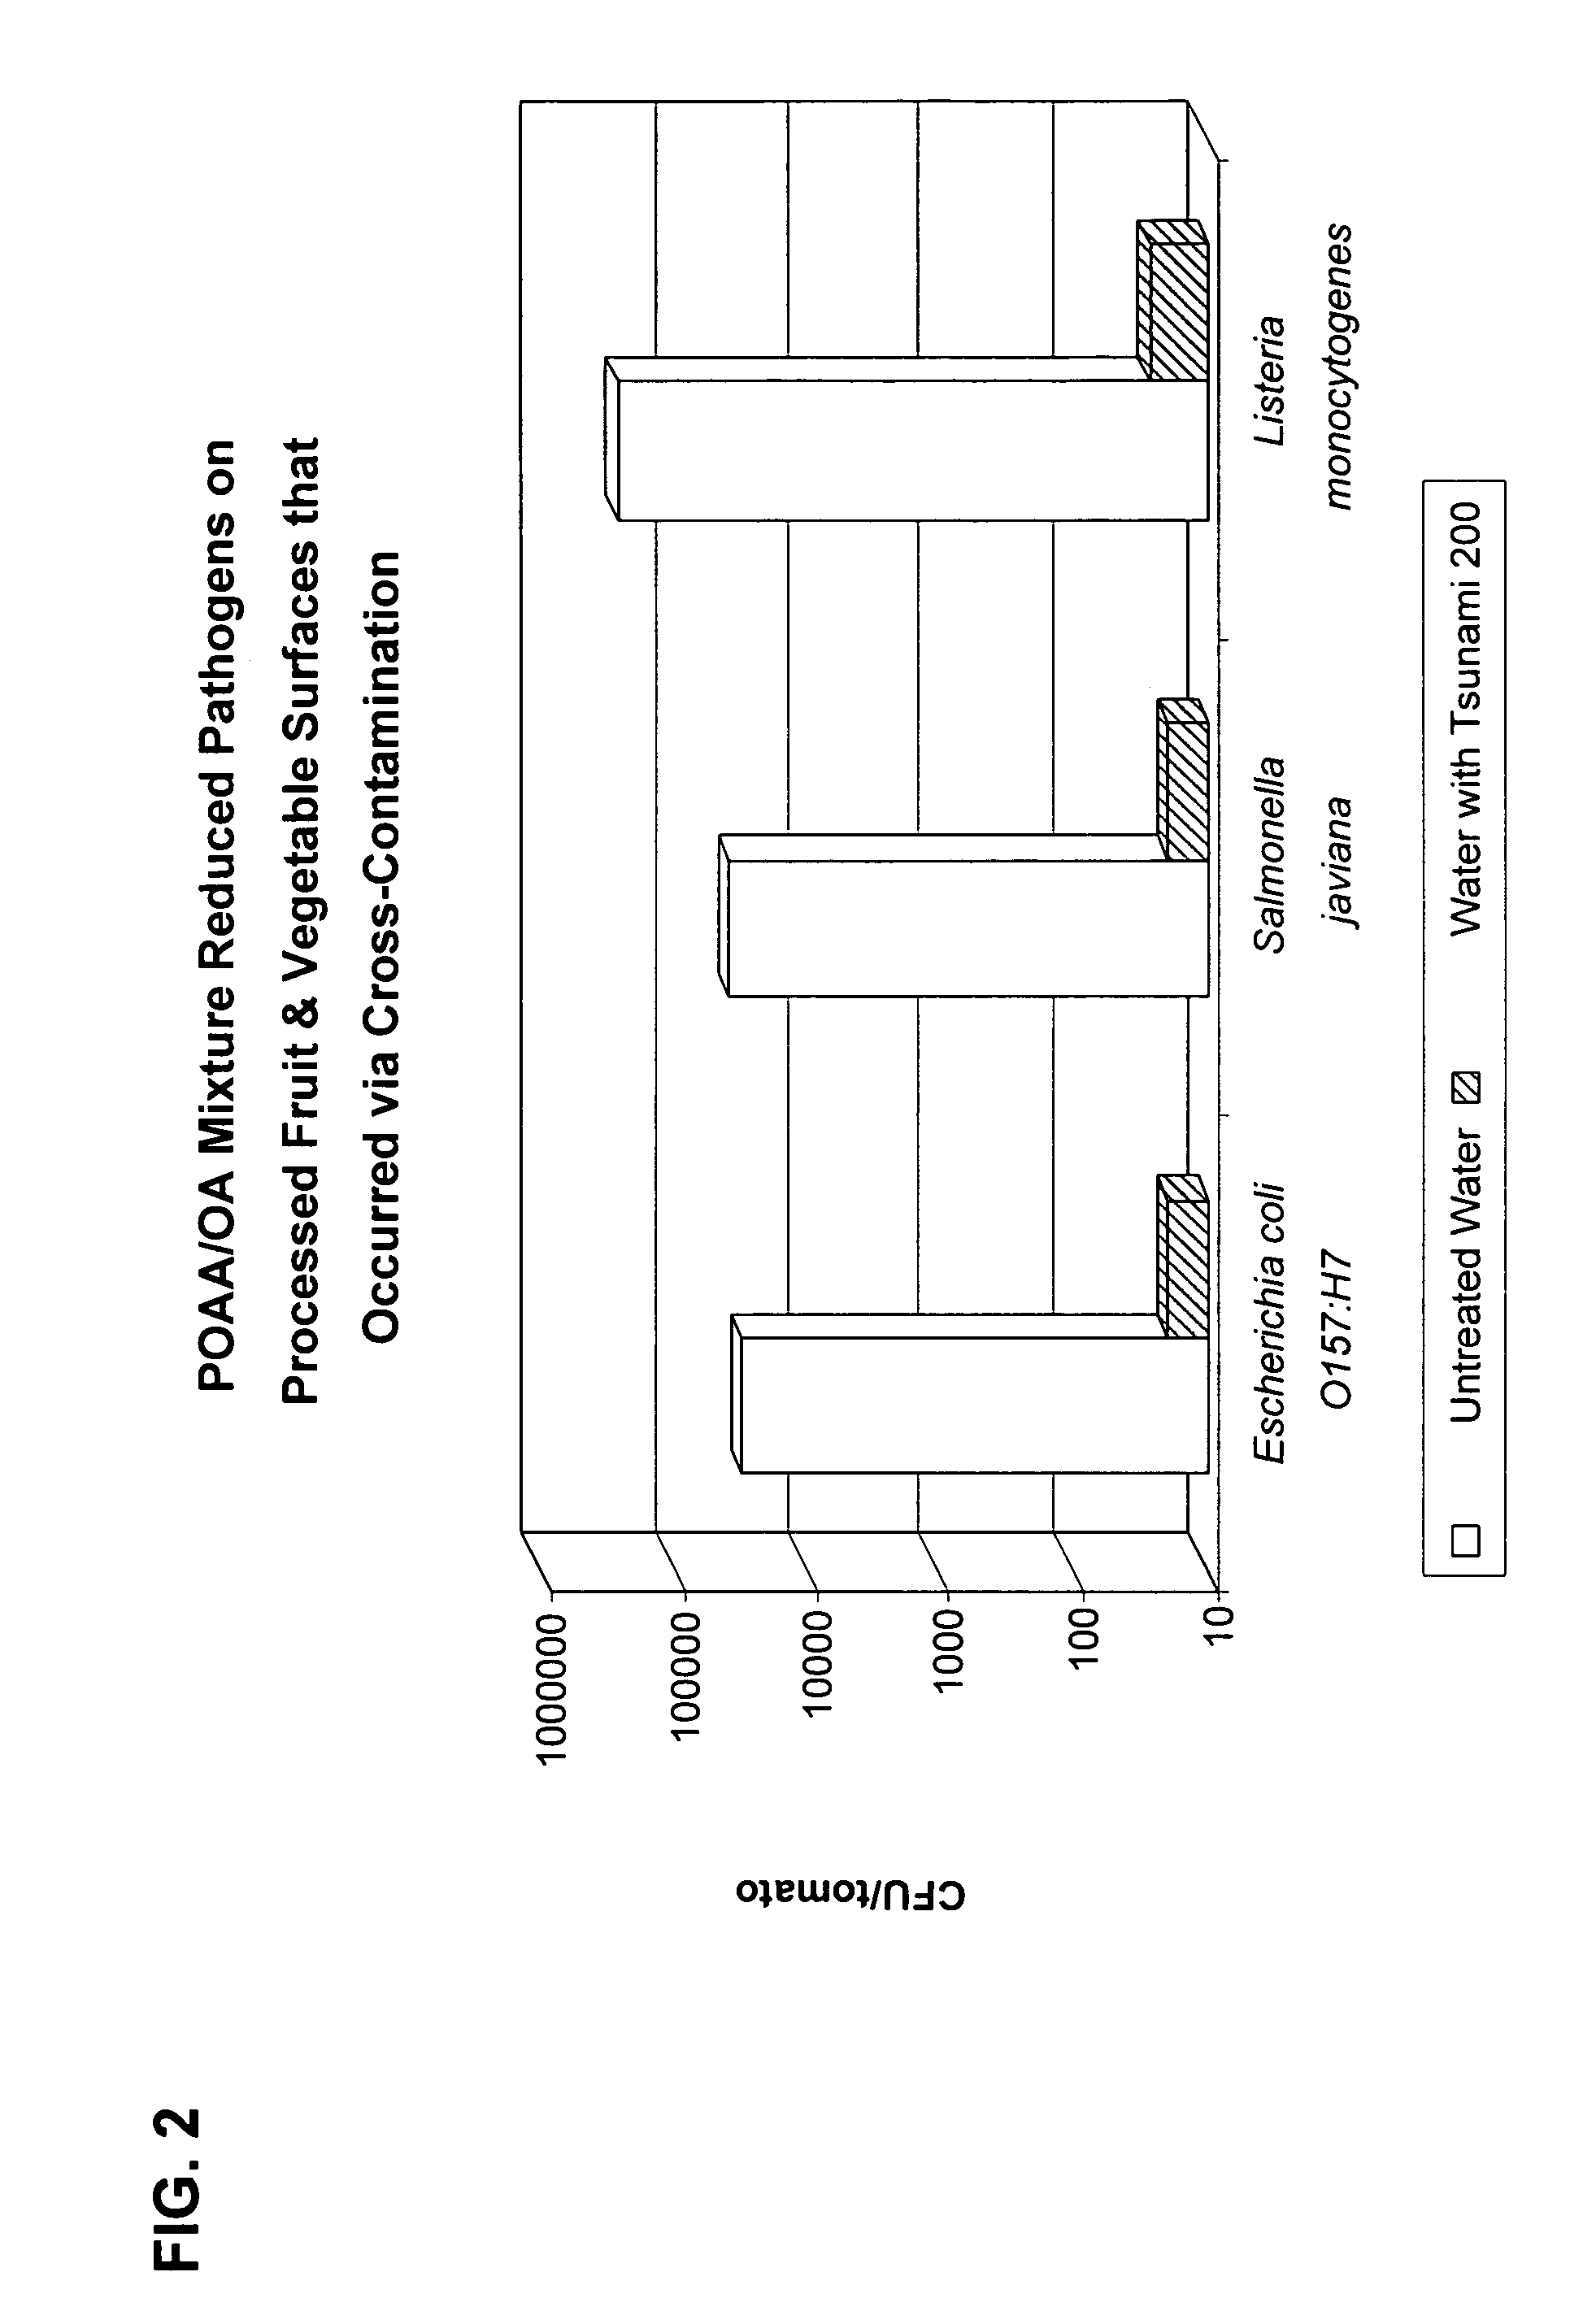 Method and composition for inhibition of microbial growth in aqueous food transport and process streams